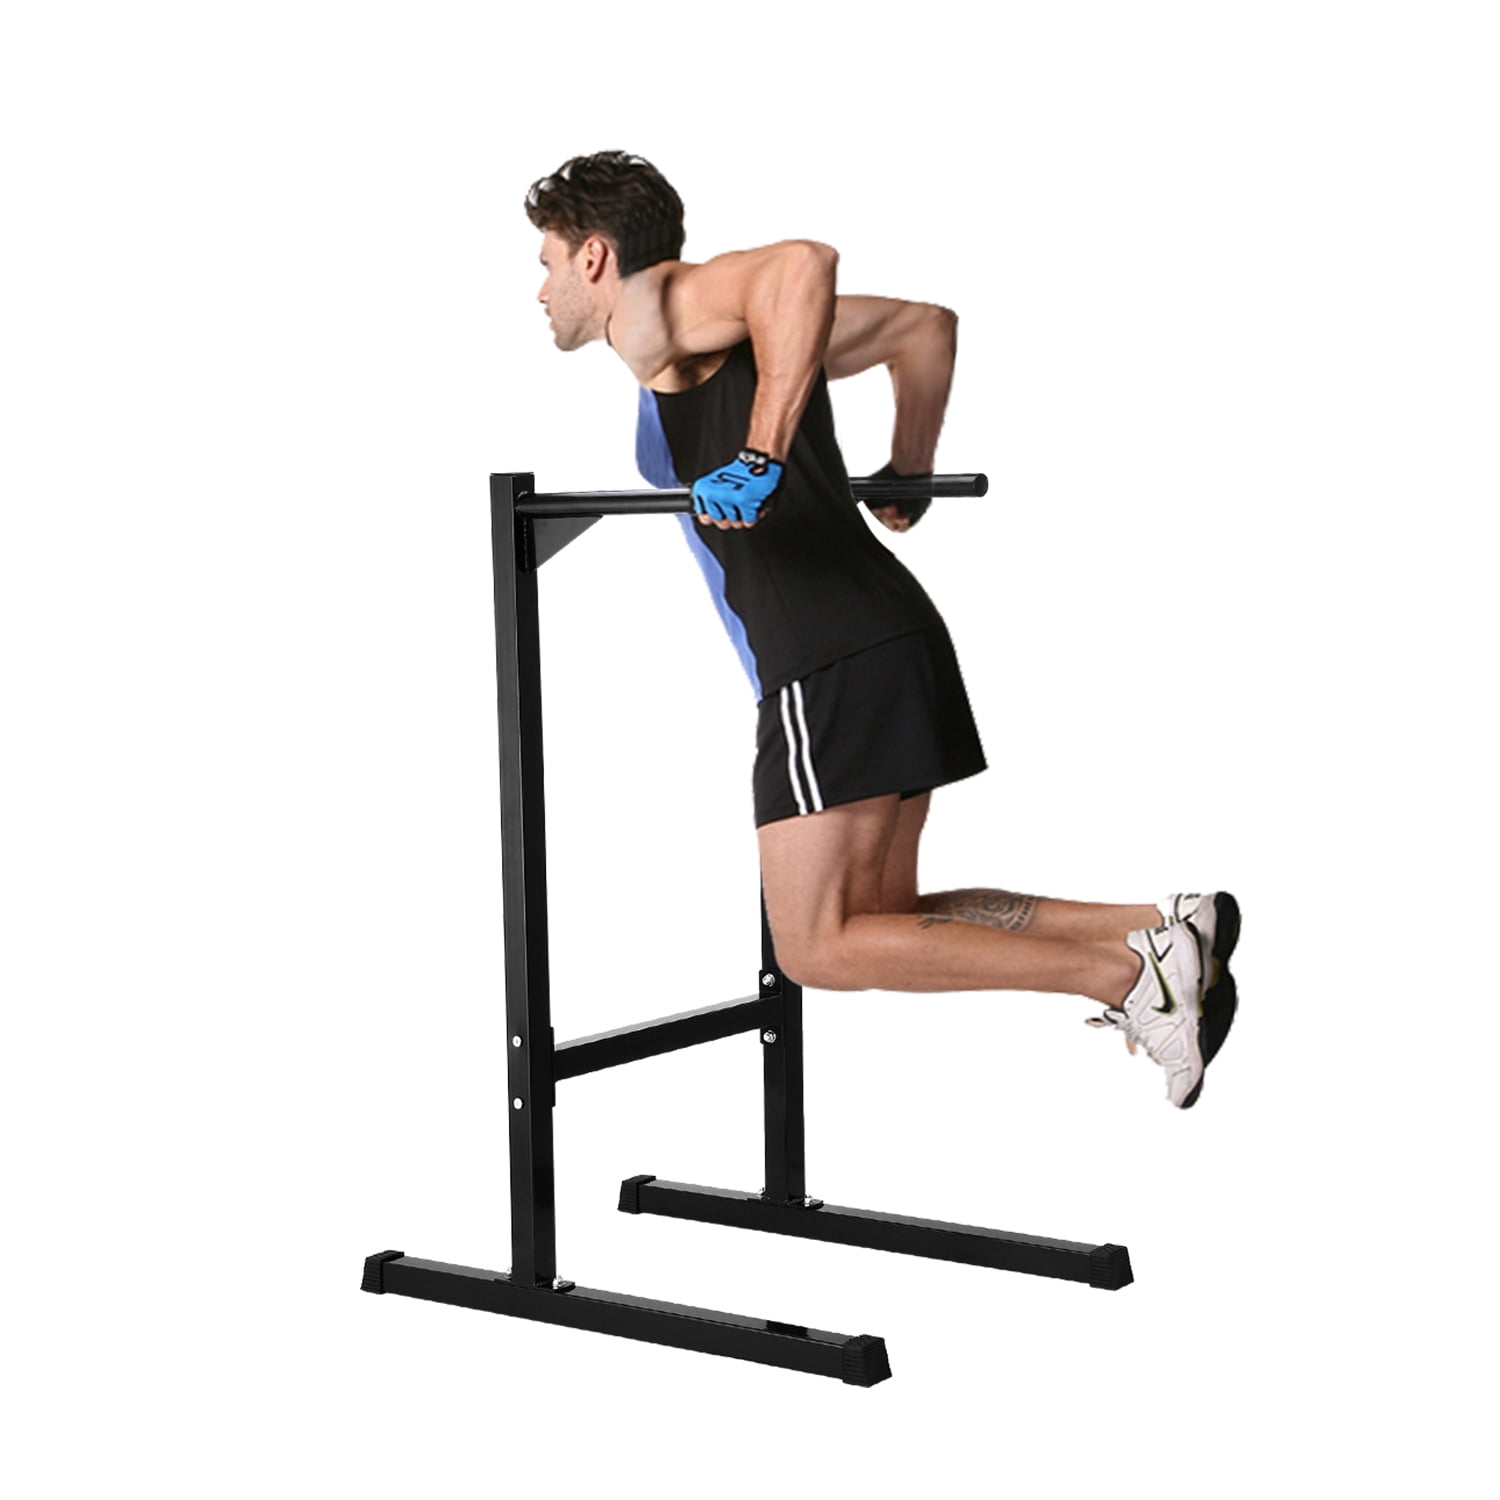 46  Workout dip station for Six Pack